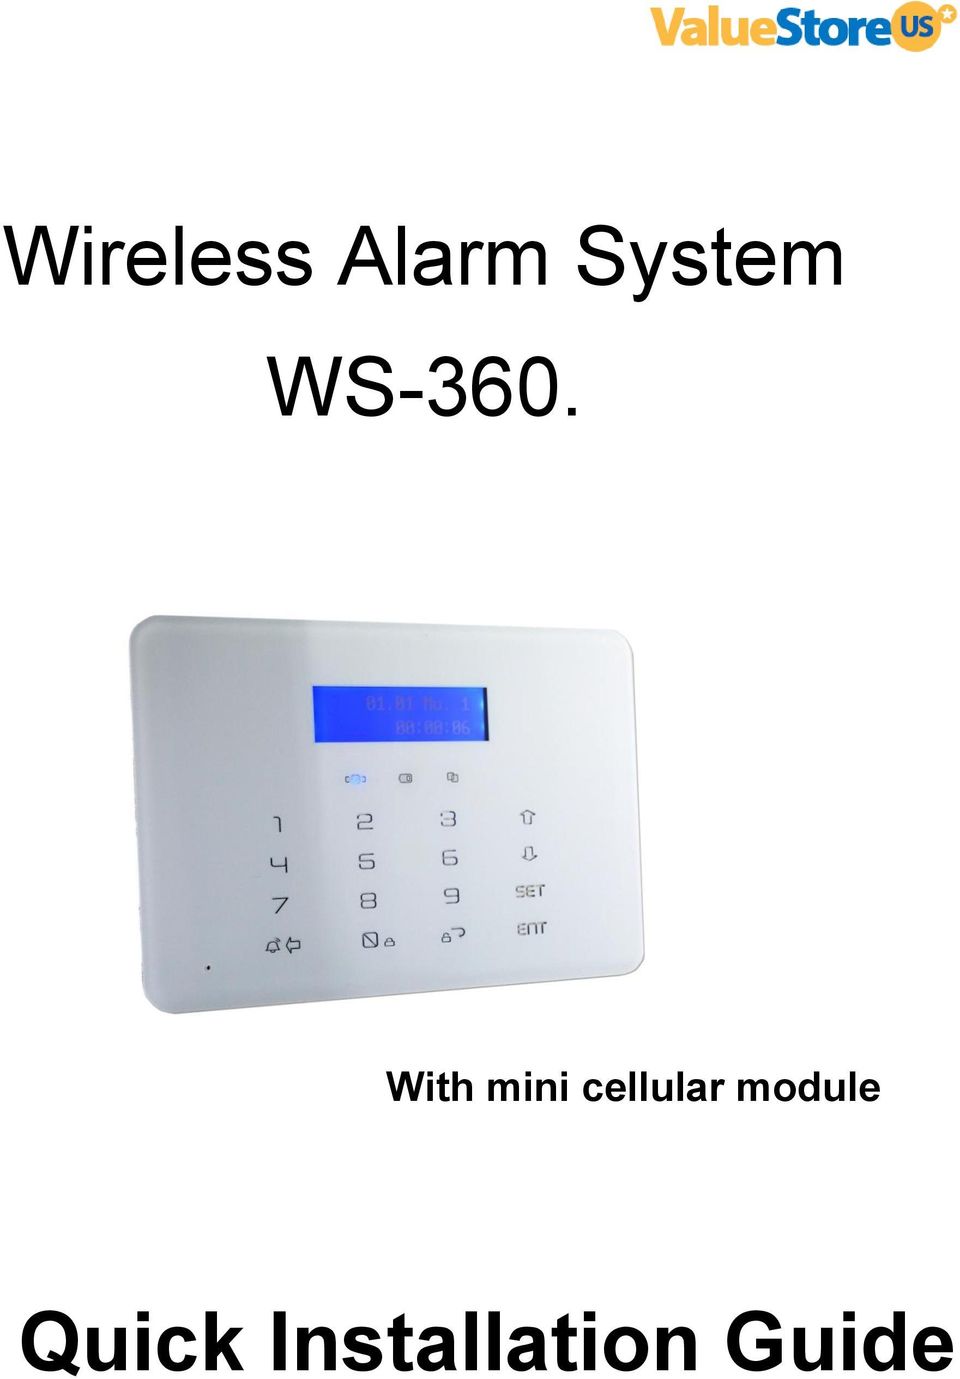 With mini cellular